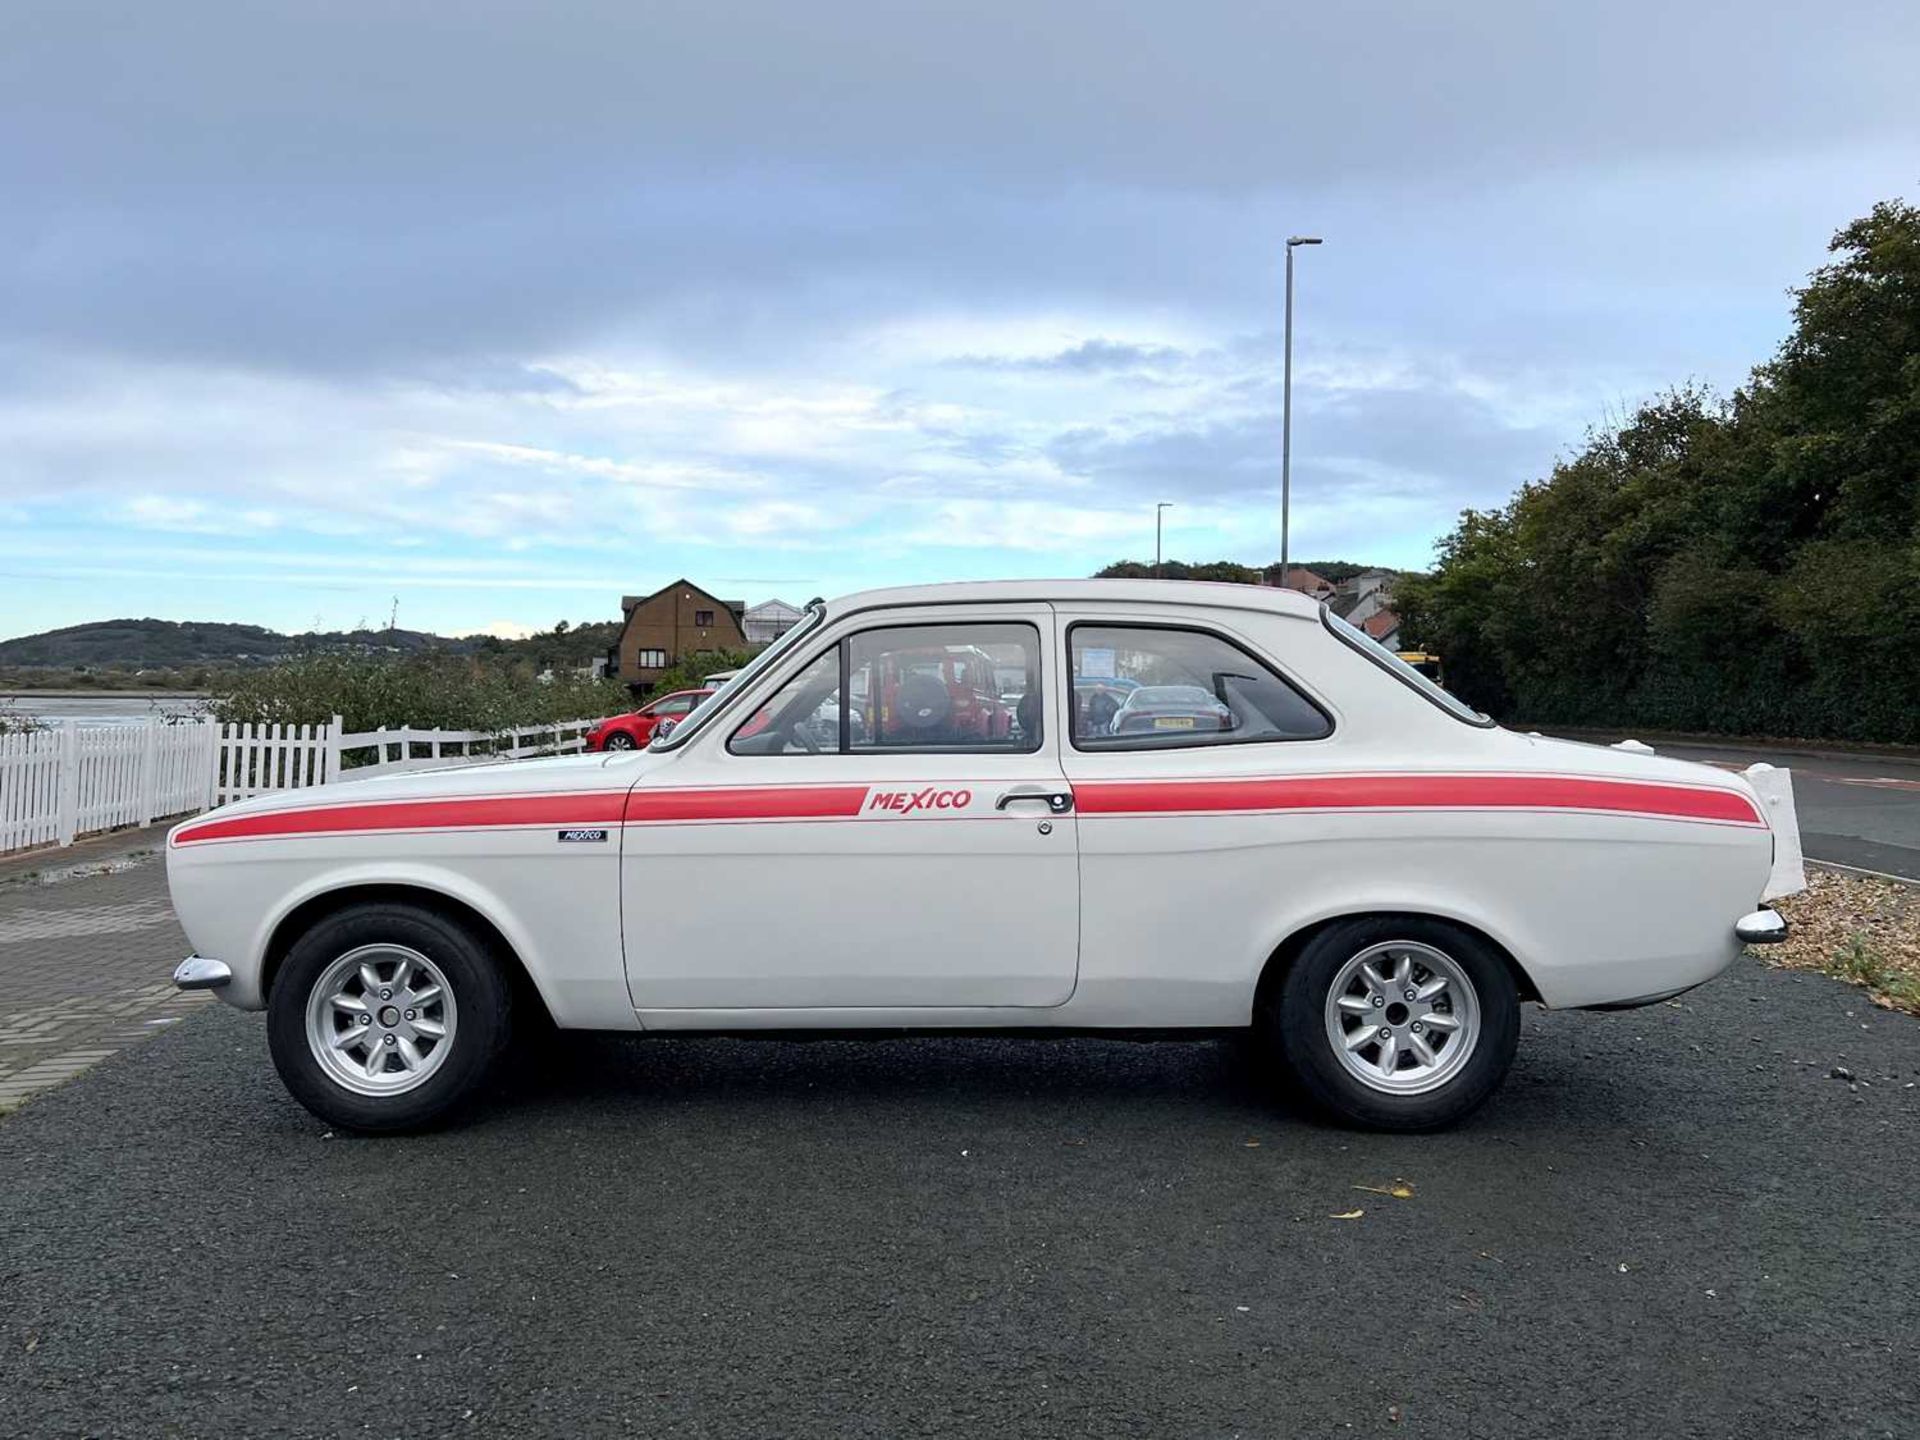 1971 Ford Escort Mexico with 2.1-litre Cosworth engine 2.1-Litre naturally aspirated Cosworth engine - Image 10 of 55